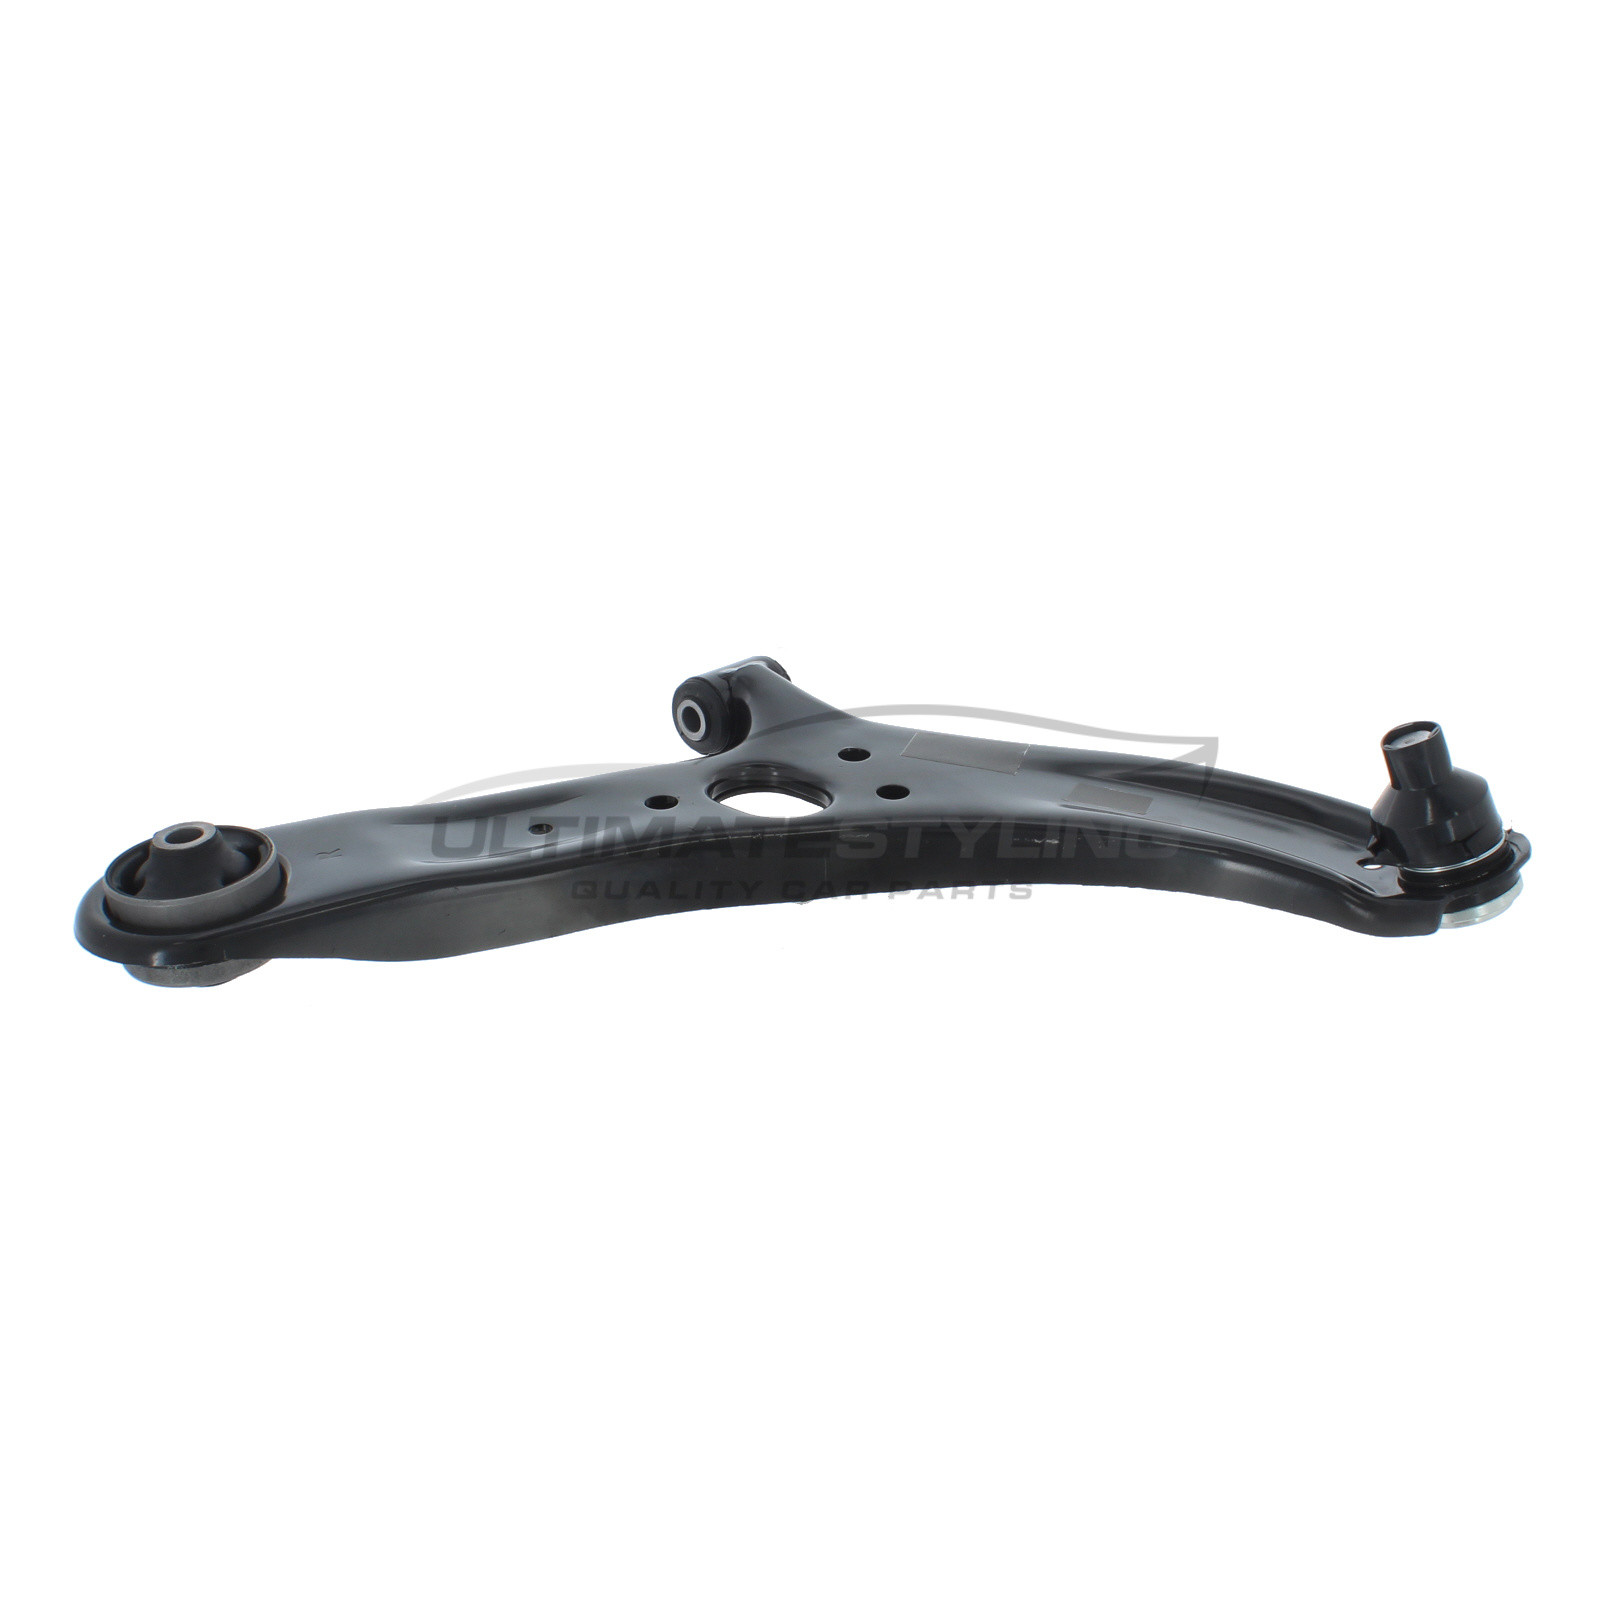 Kia Rio 2011-2017 Front Lower Suspension Arm (Pressed Steel) Including Ball Joint and Rear Bush Driver Side (RH)